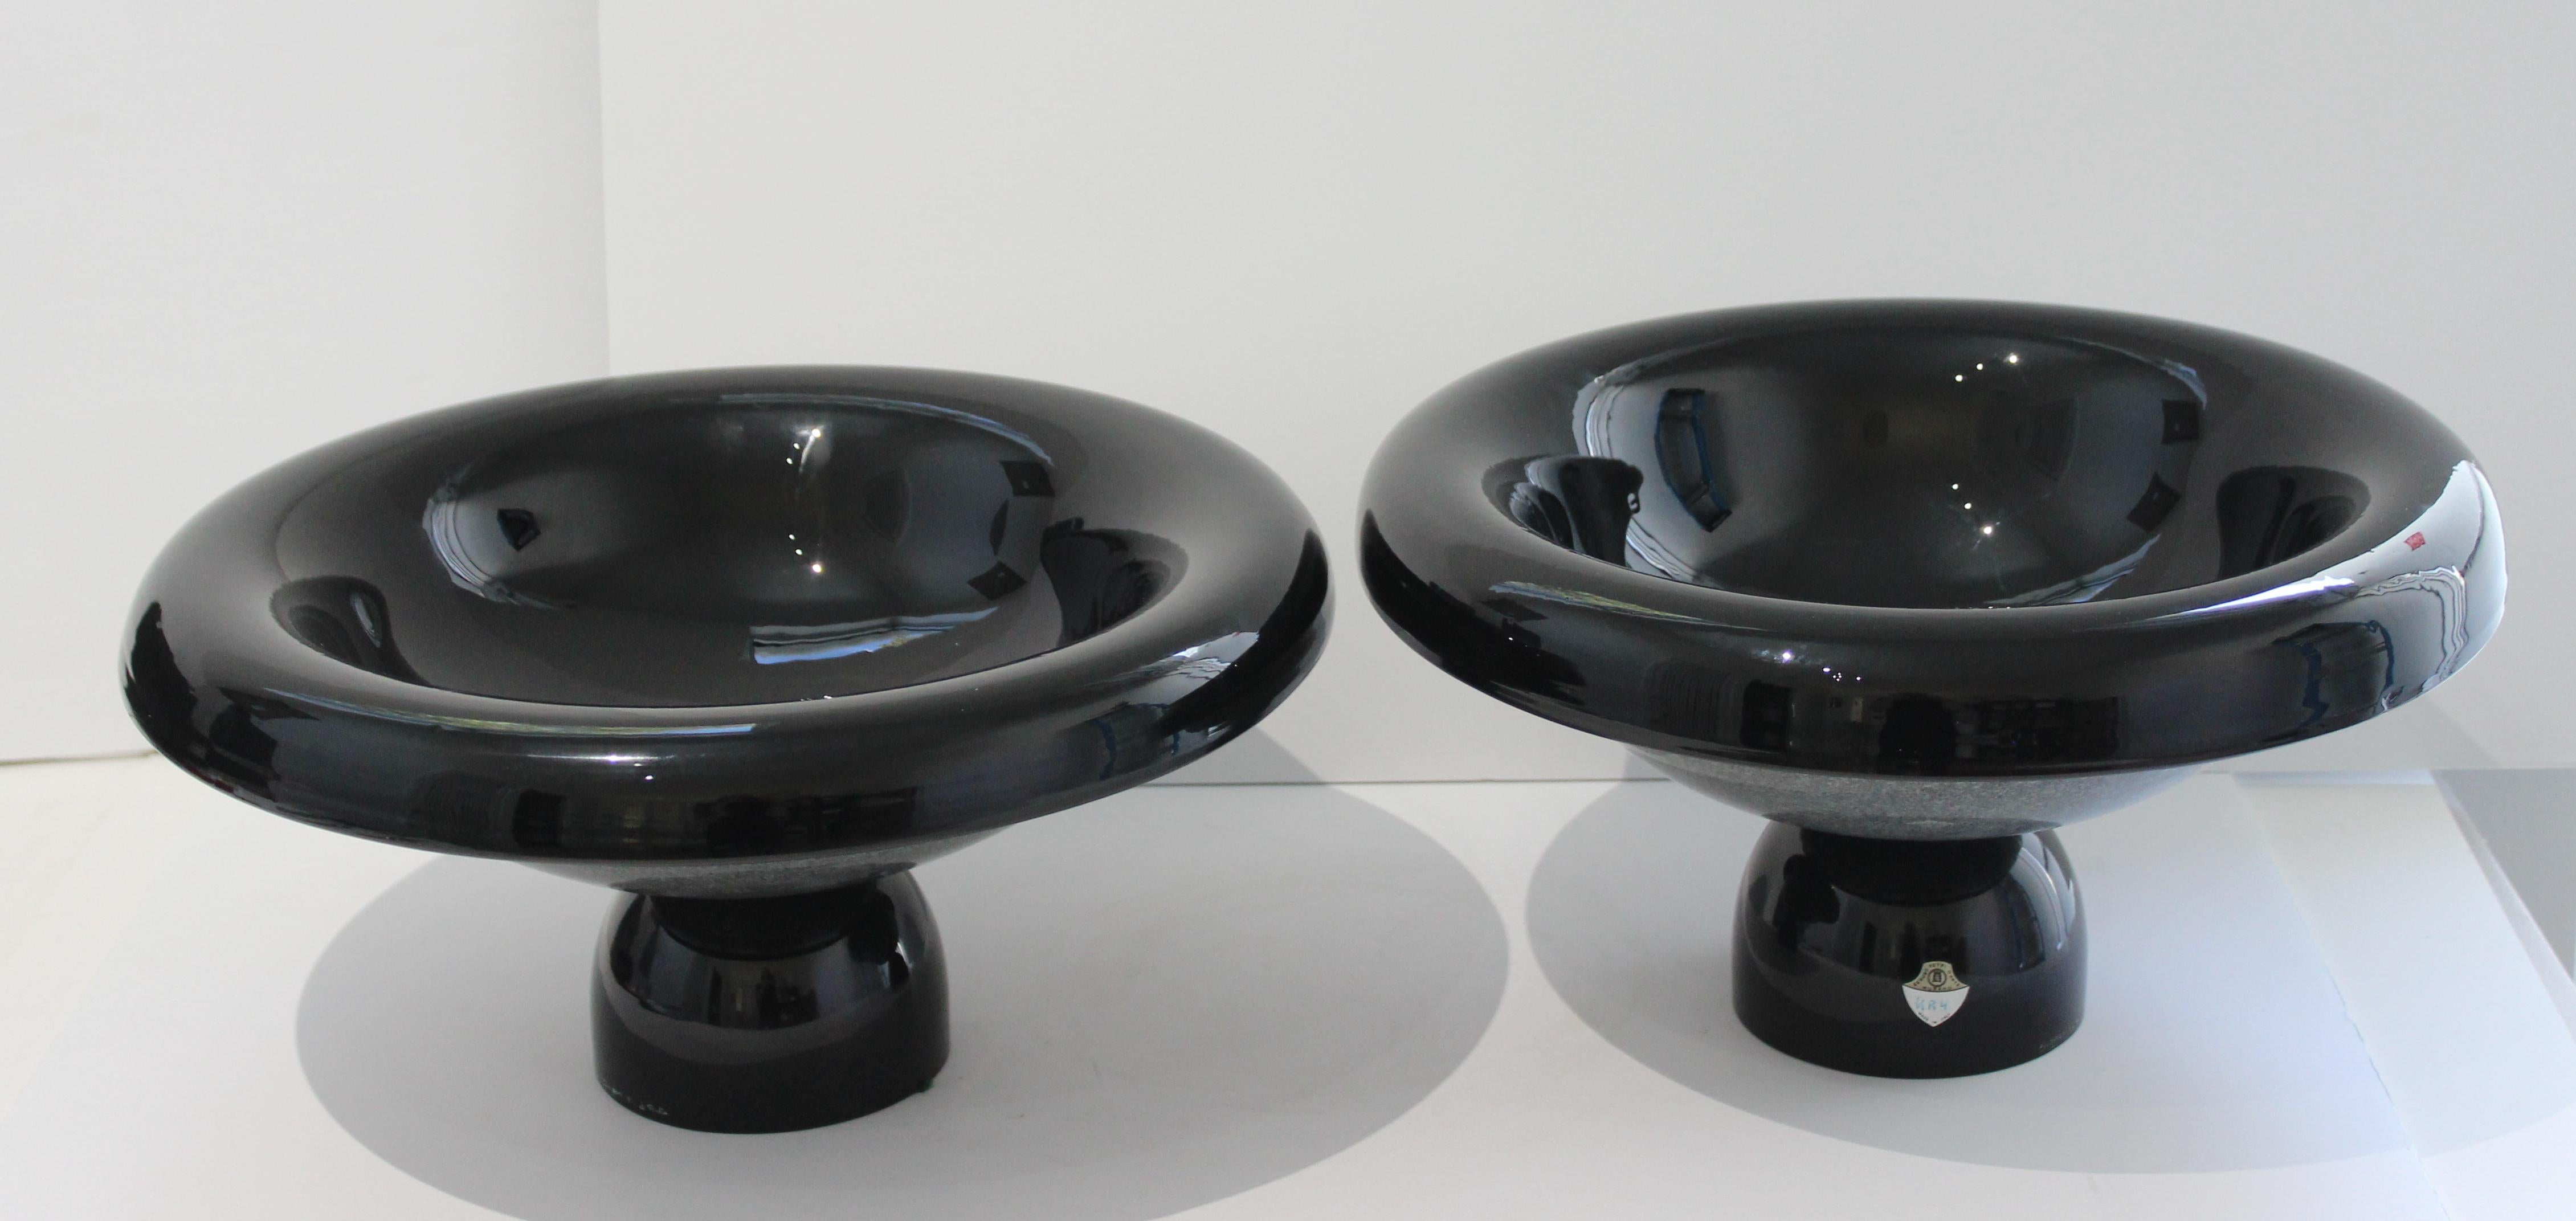 Pair of Mid-Century Modern Seguso Vetre d'Arte Compotes - Hand made by Artisans - from a Palm Beach estate.

These are not mechanical exact copies but show slightly different sizes as one would expect from an artisan workshop. 

Note: Dimensions of